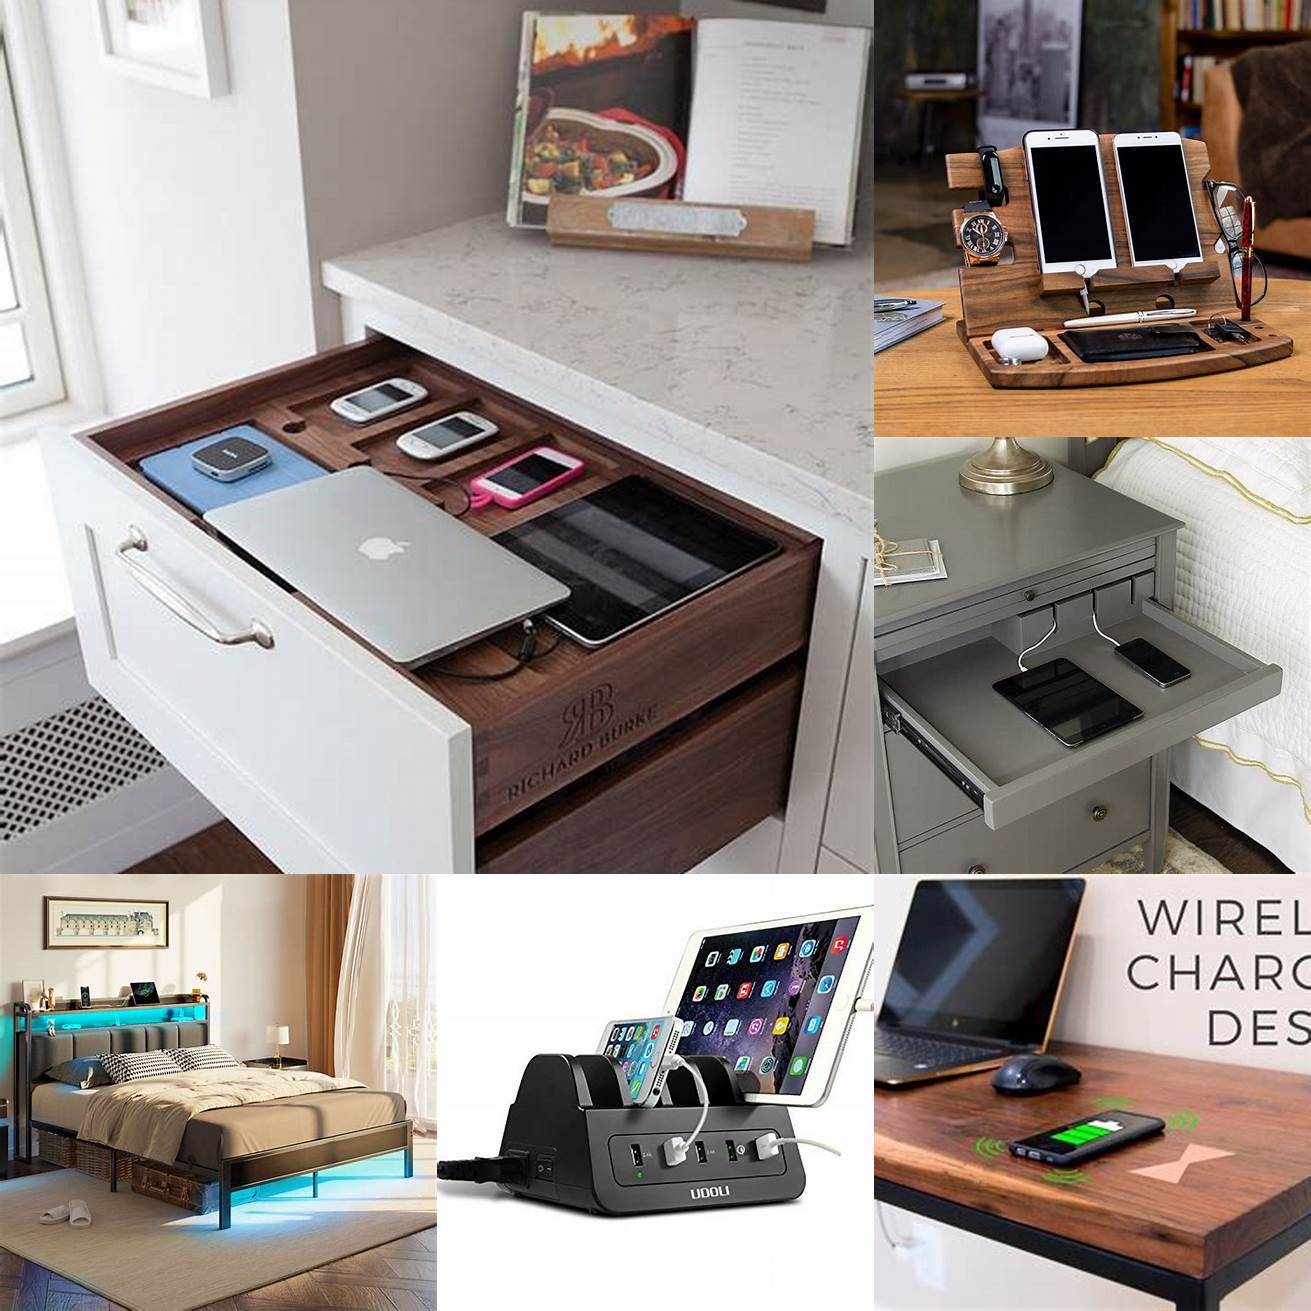 Desk Bed with a built-in charging station for your devices